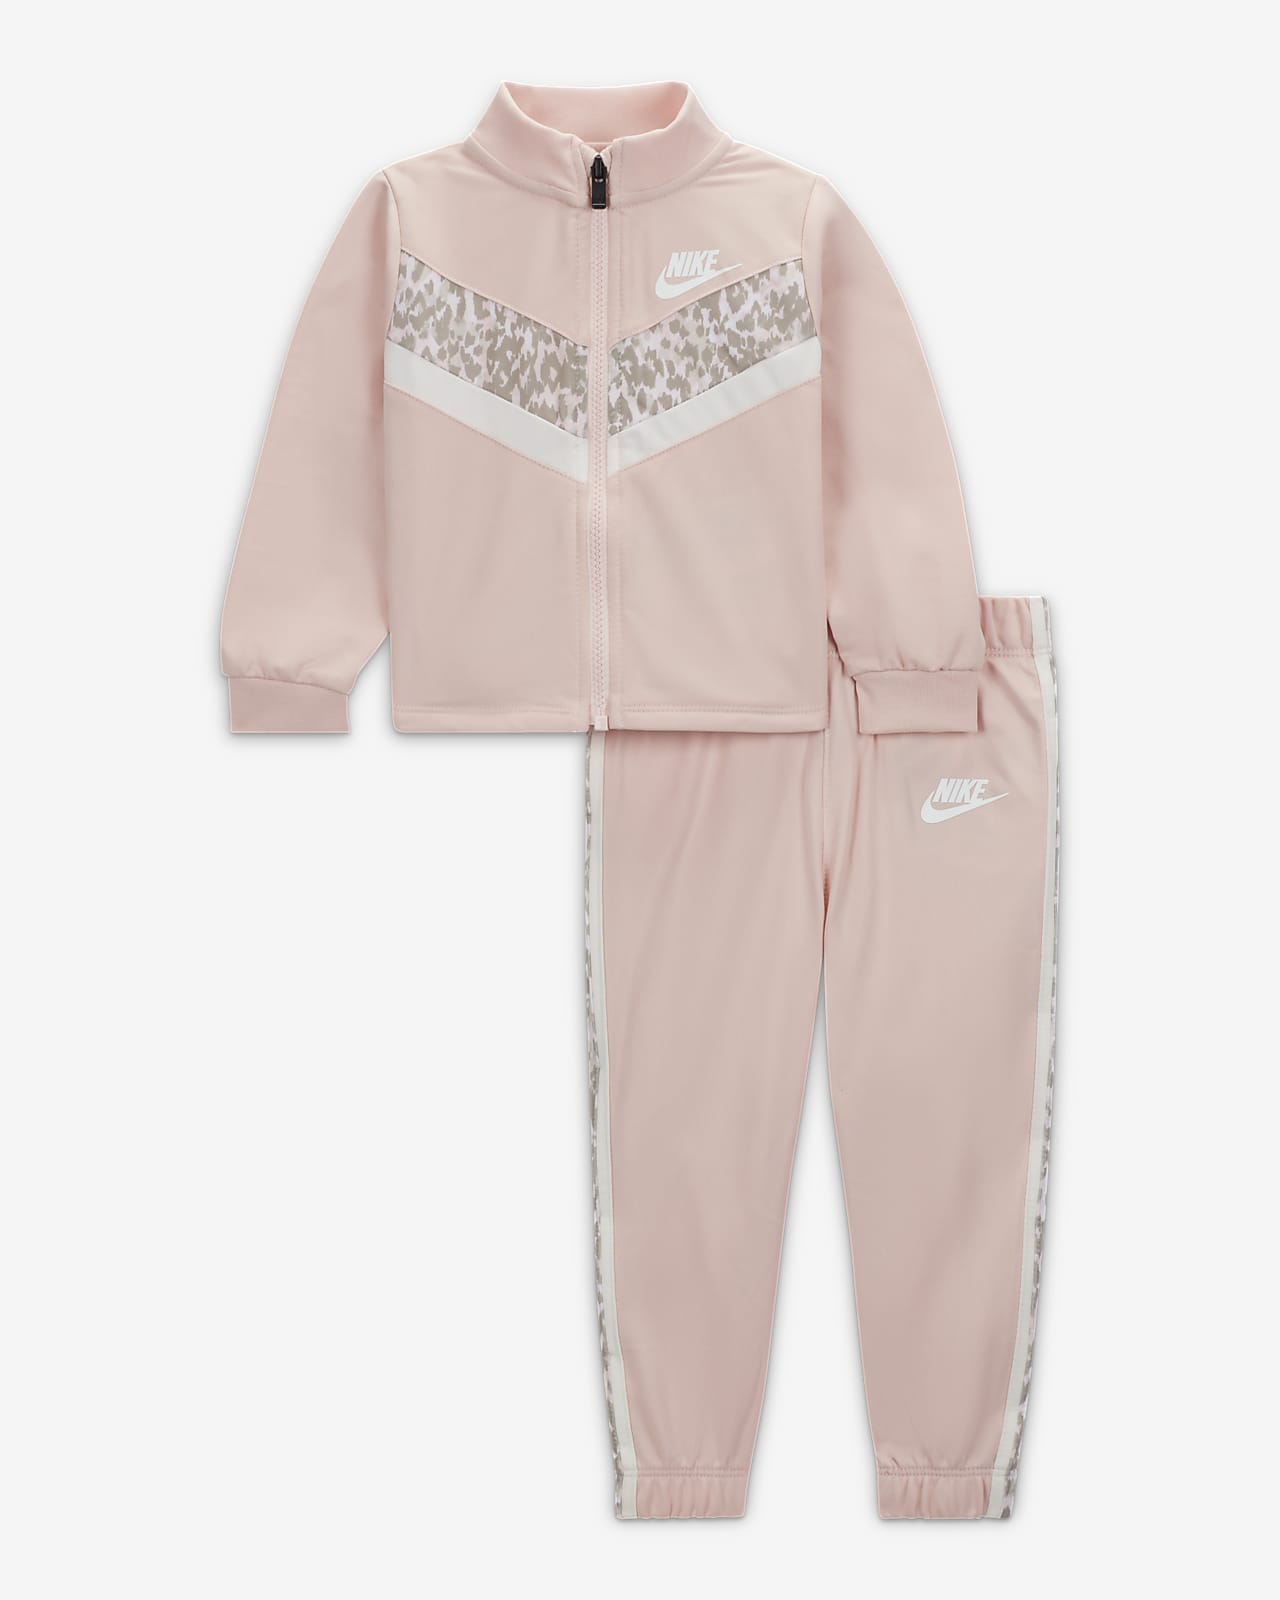 Nike Leopard Tricot Set Baby Tracksuit.